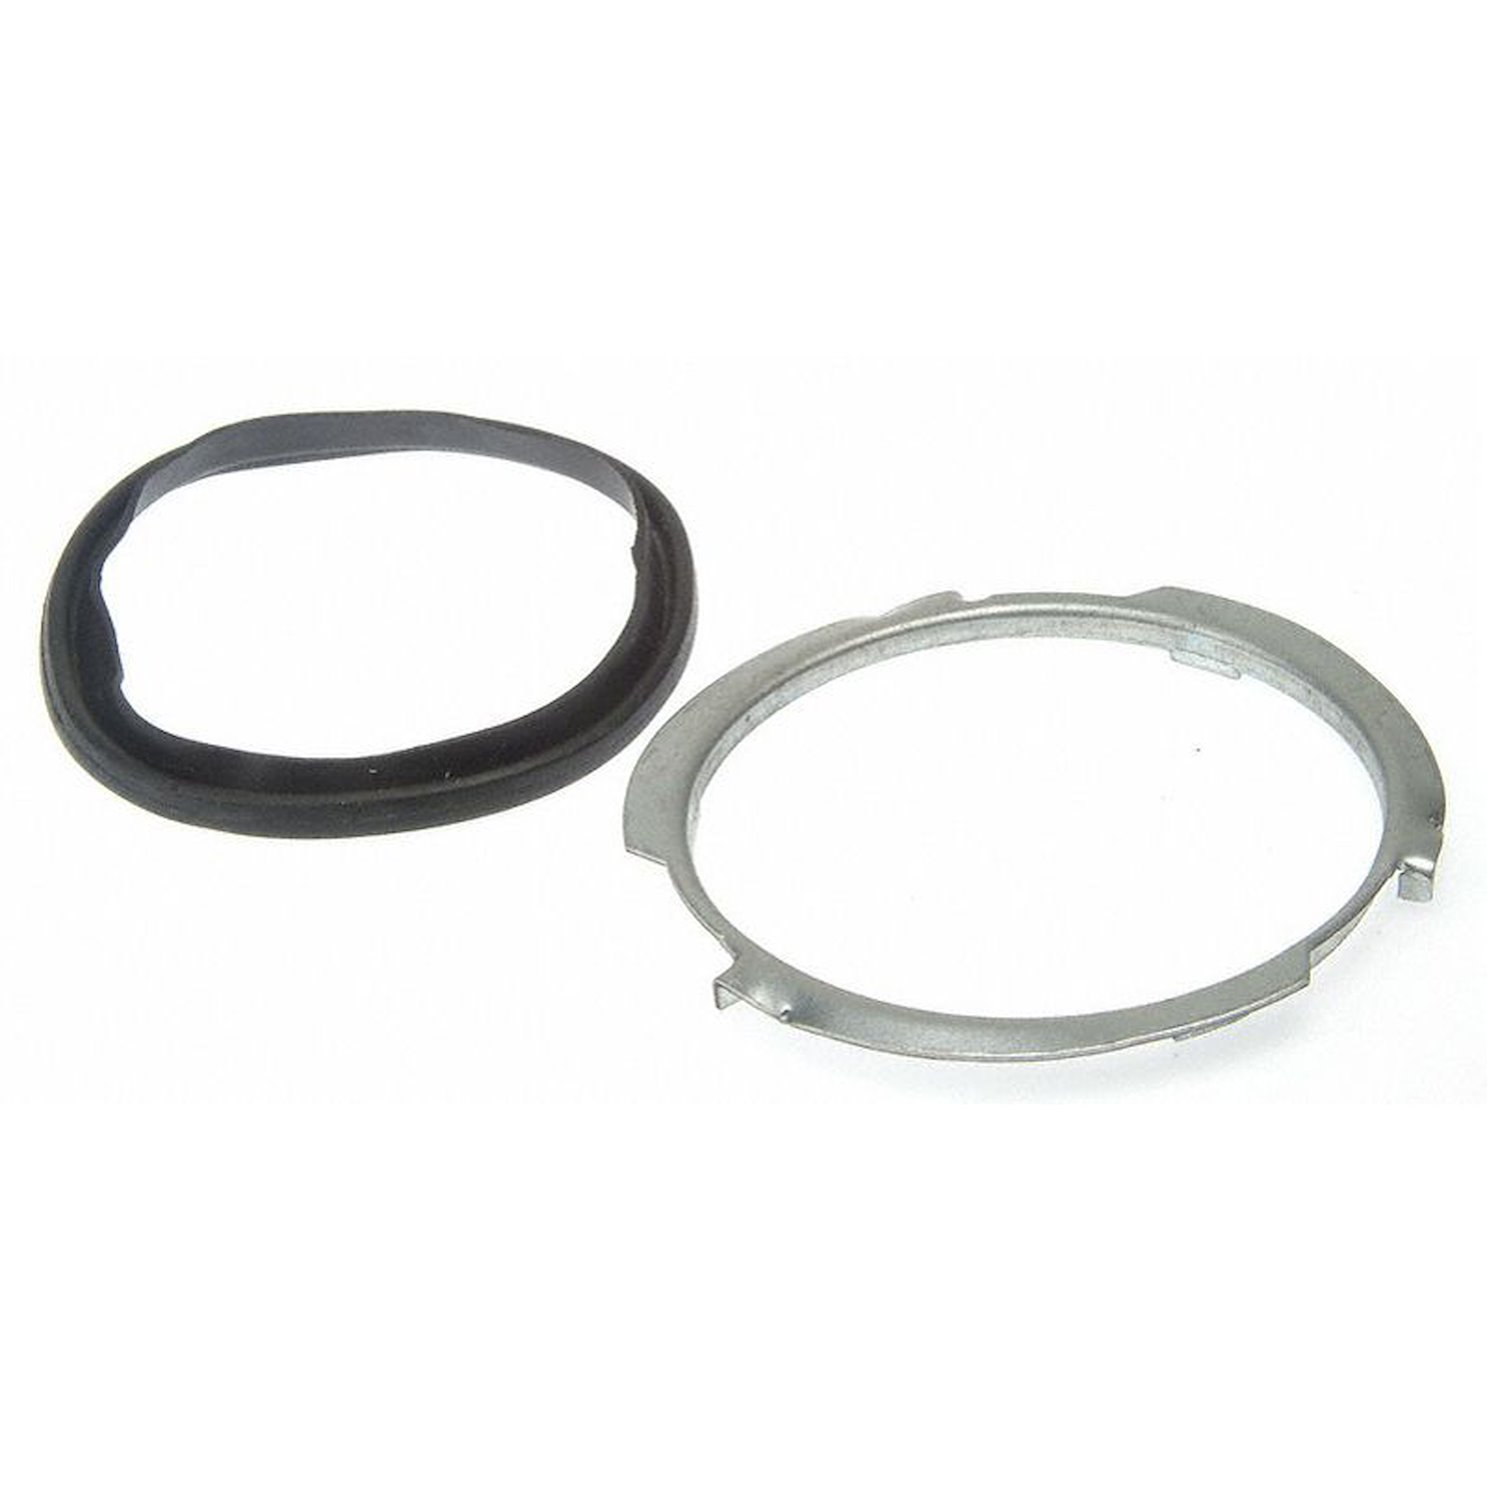 Fuel Tank Lock Ring for 1988-1997 GM Vehicles